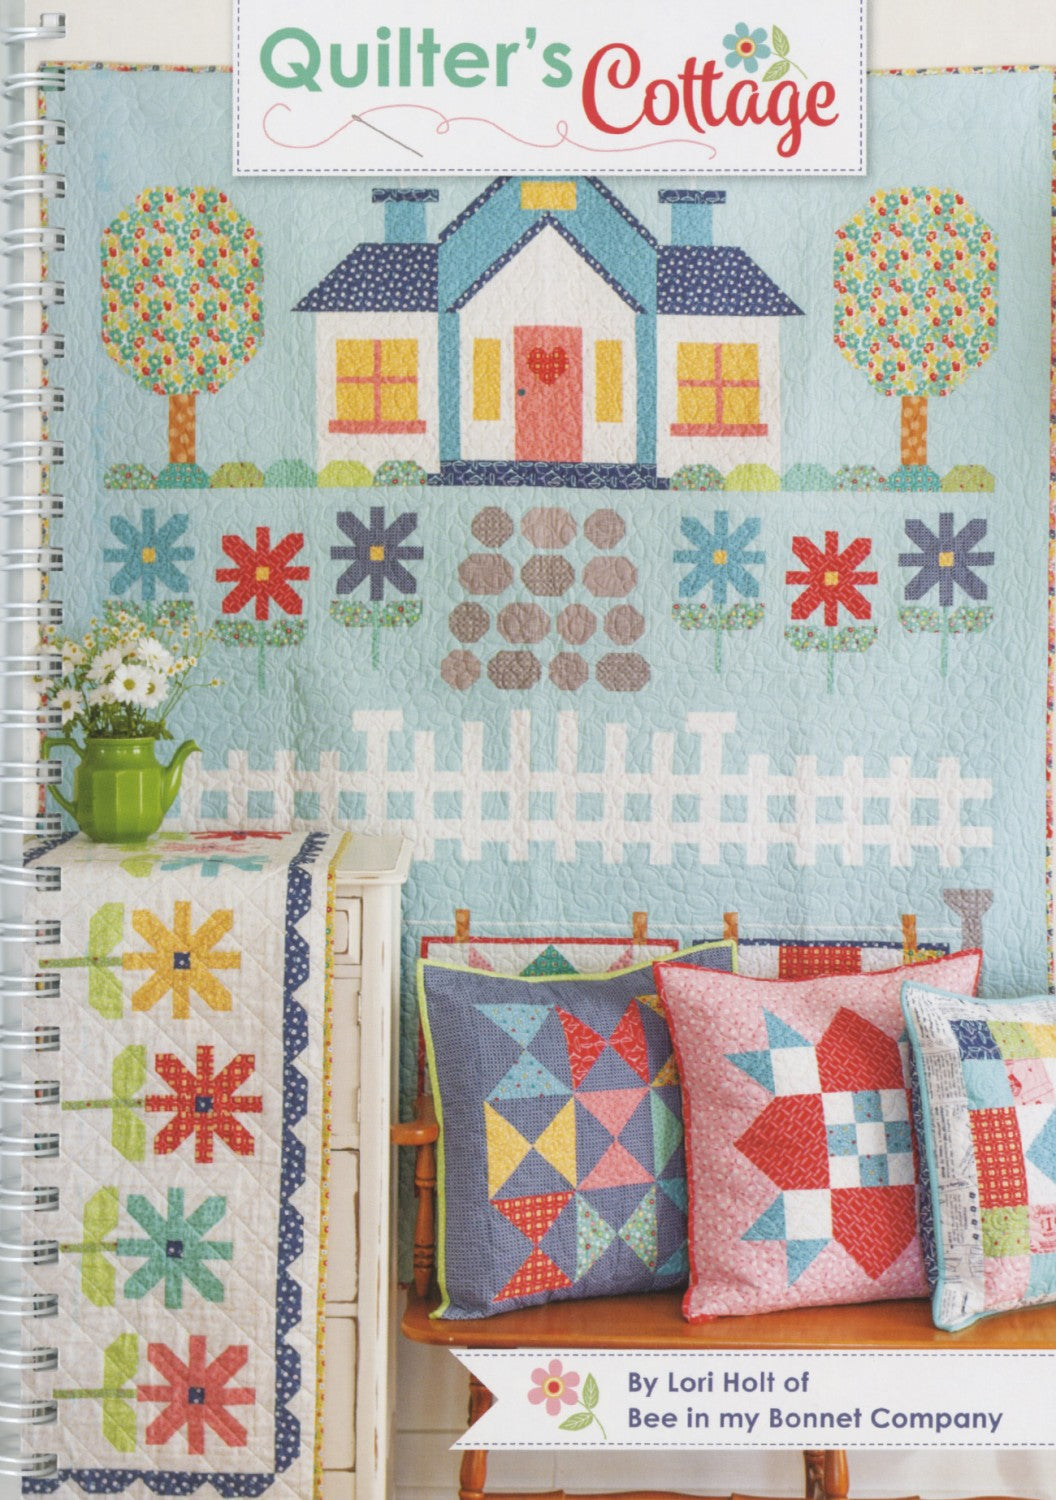 Quilter's Cottage Quilt Pattern Book by Lori Holt for It's Sew Emma